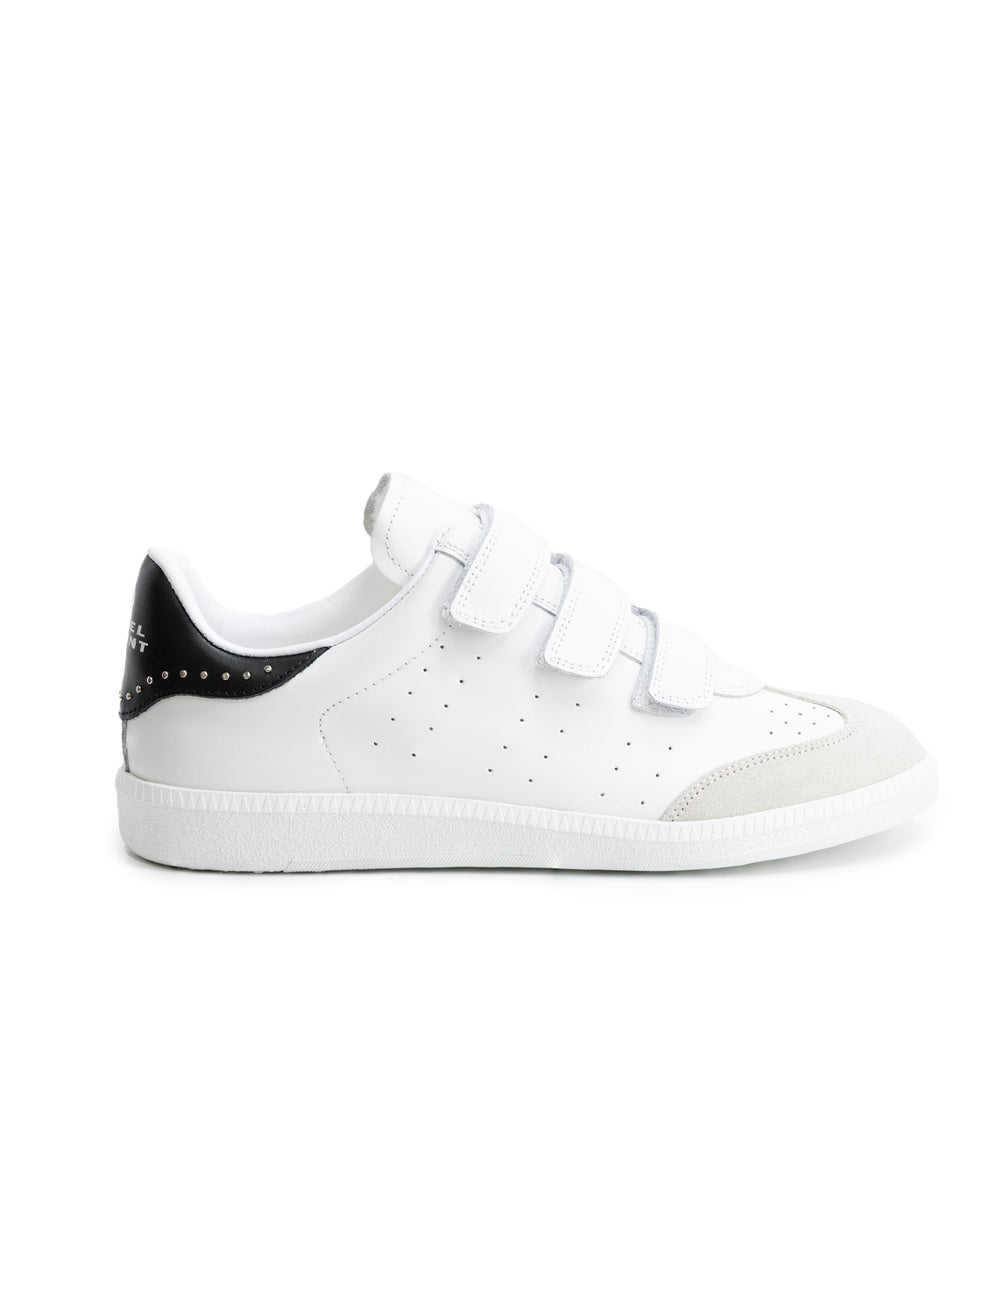 Side view of Isabel Marant Etoile's beth sneaker in studded classic.